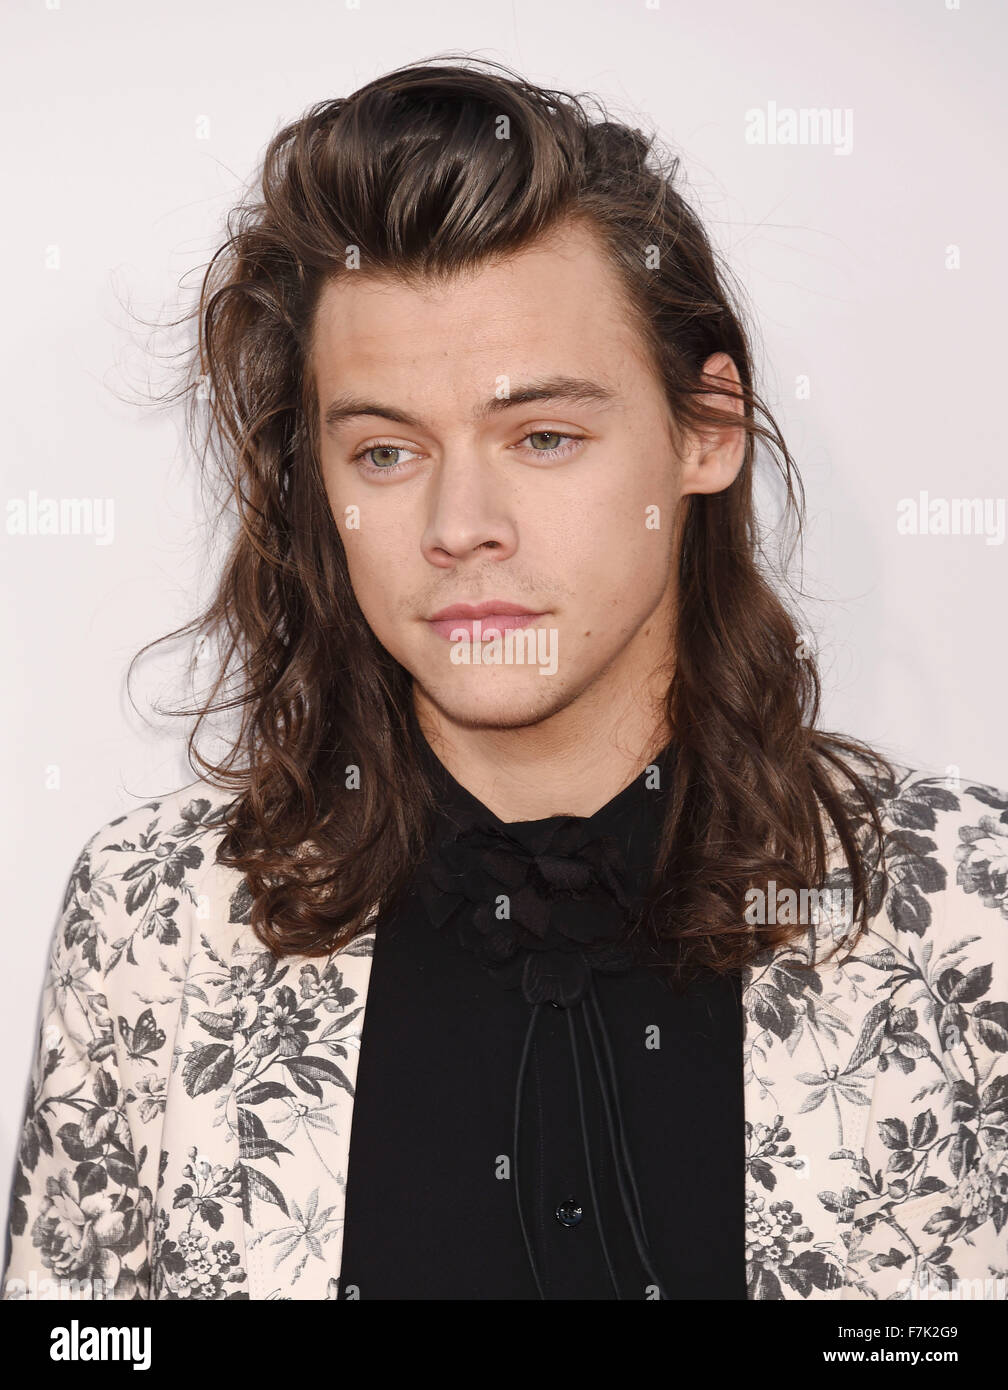 HARRY STYLES UK pop singer with One Direction in November 2015. Photo Jeffrey Mayer Stock Photo